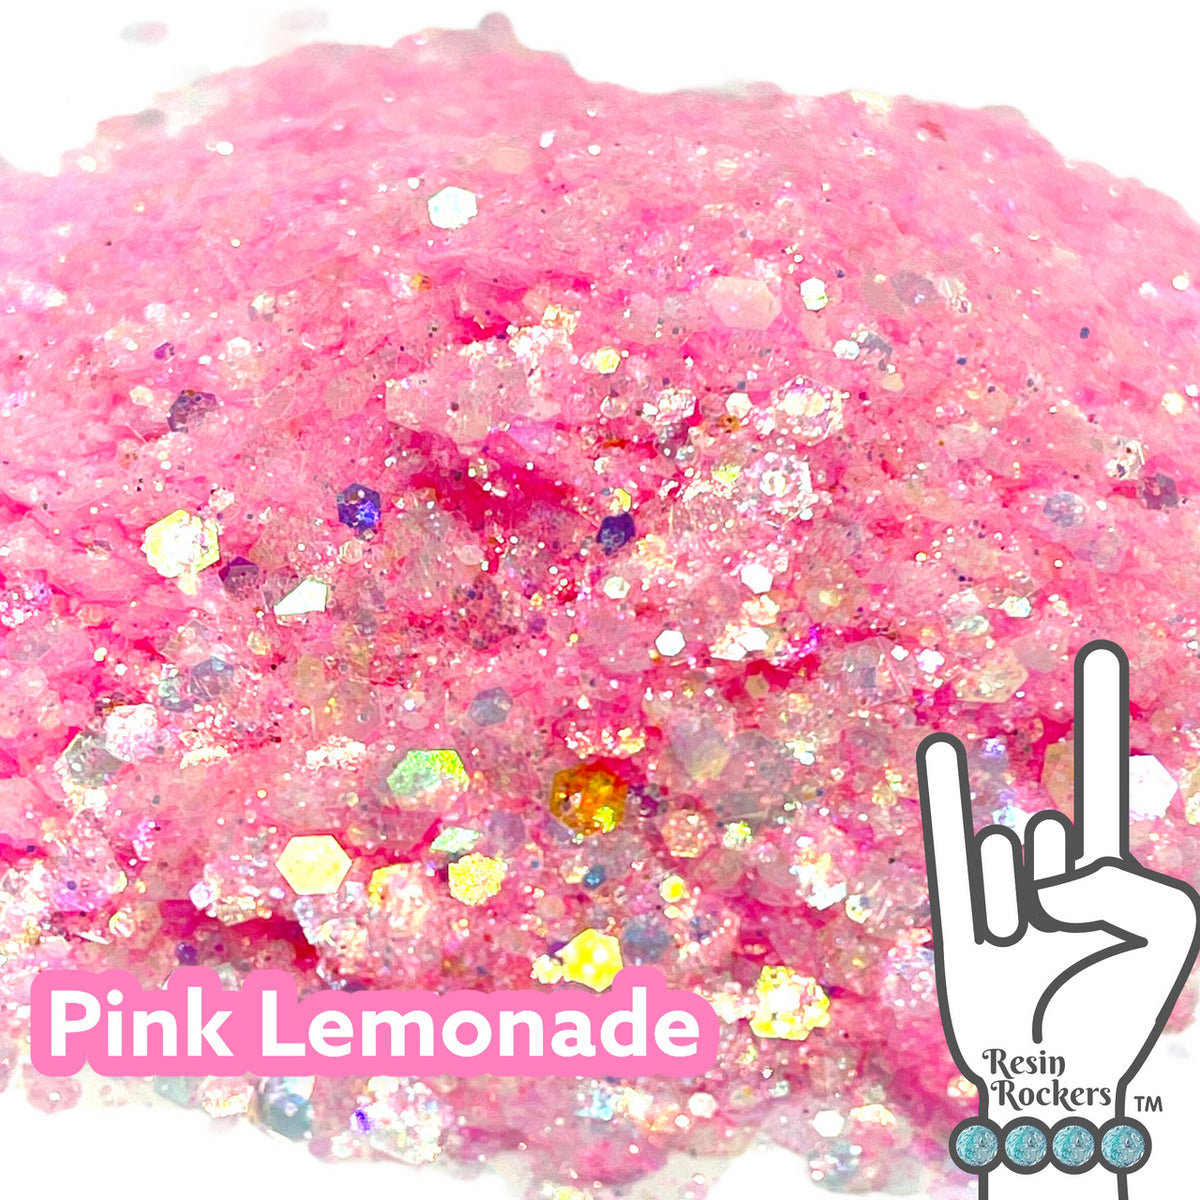 Pink Lemonade Iridescent Holographic Premium Pixie for Poxy Chunky Glitter Mix